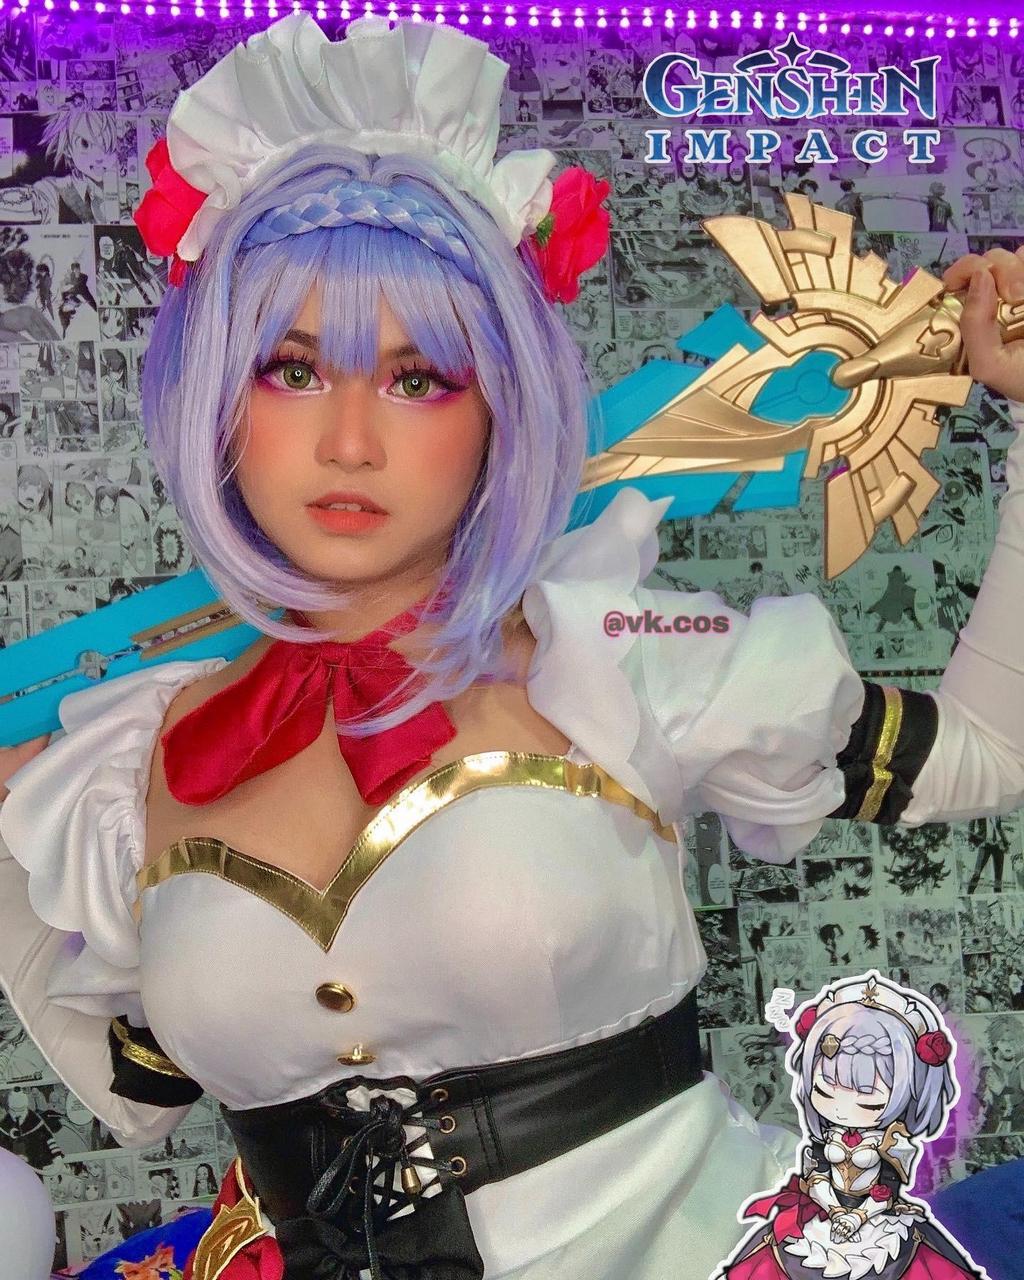 Sharing My Noelle Cosplay From Genshin Impact Vk Cos